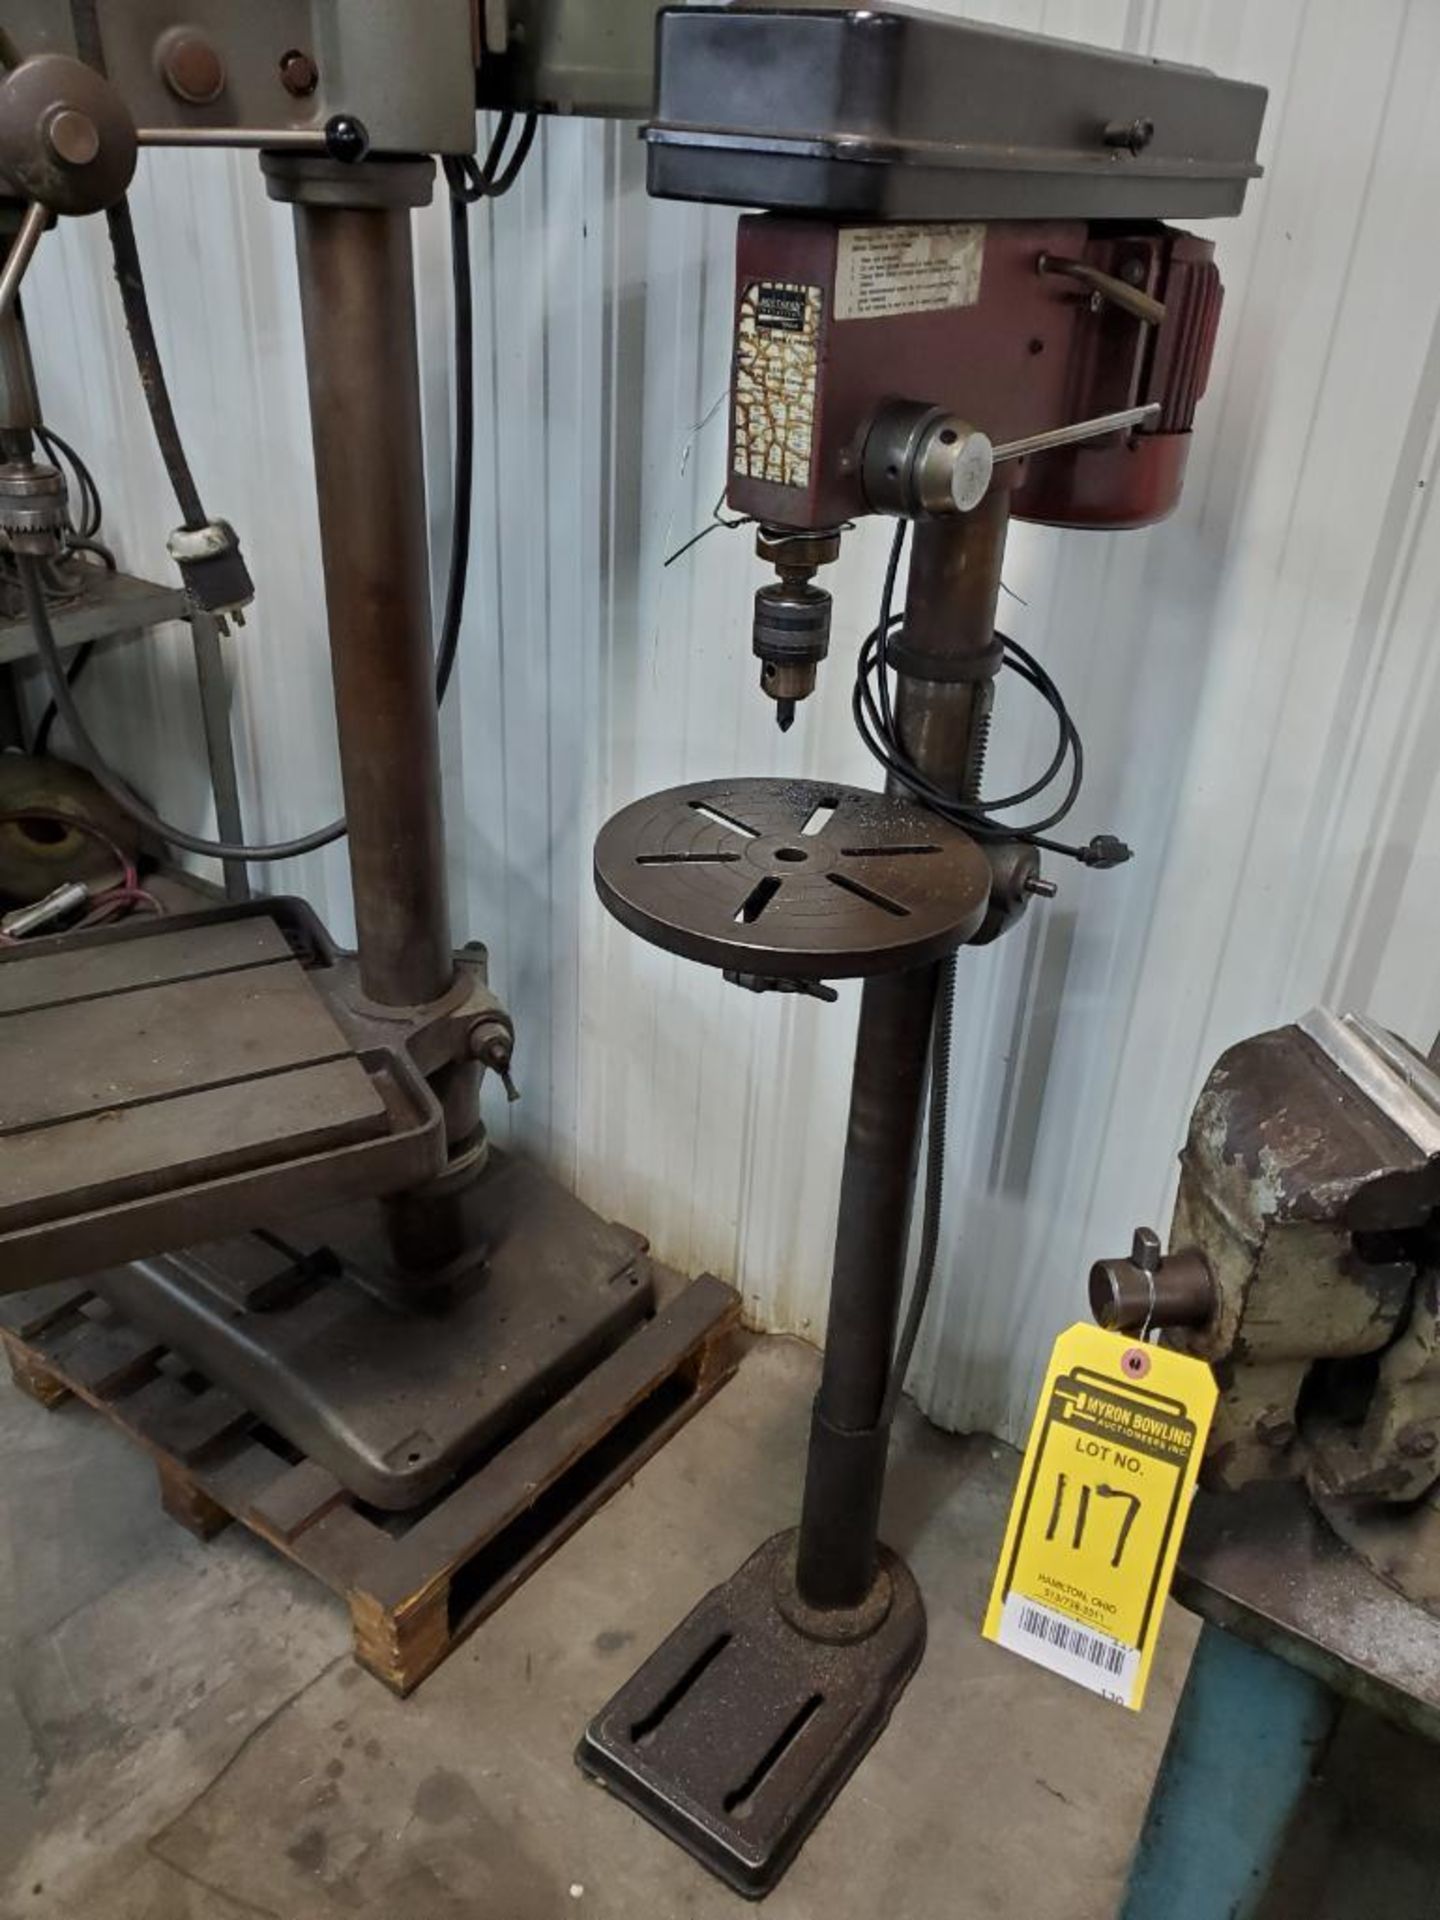 NORTHERN 16-SPEED VERTICAL FLOOR DRILL PRESS, 11-1/4'' DIA TABLE, 200-3850 RPM, 5/8'' MAX DRILLING - Image 3 of 5